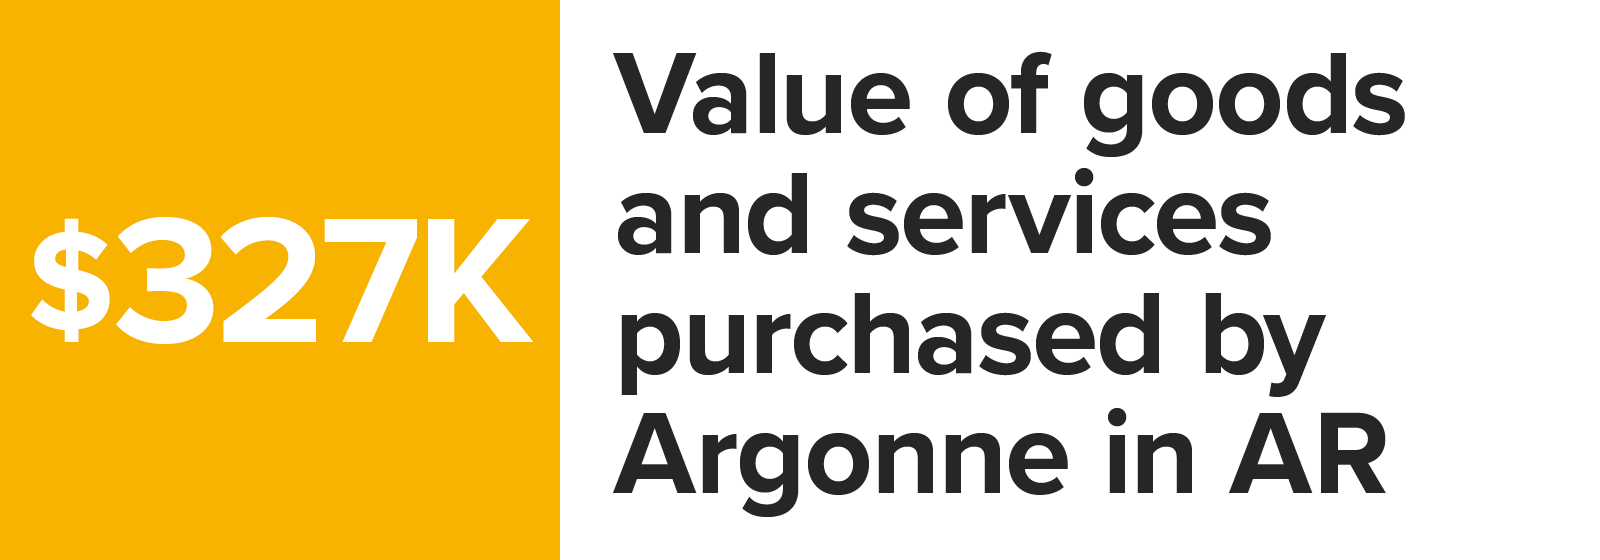 Number graphic value of goods and services purchased by Argonne in Arkansas